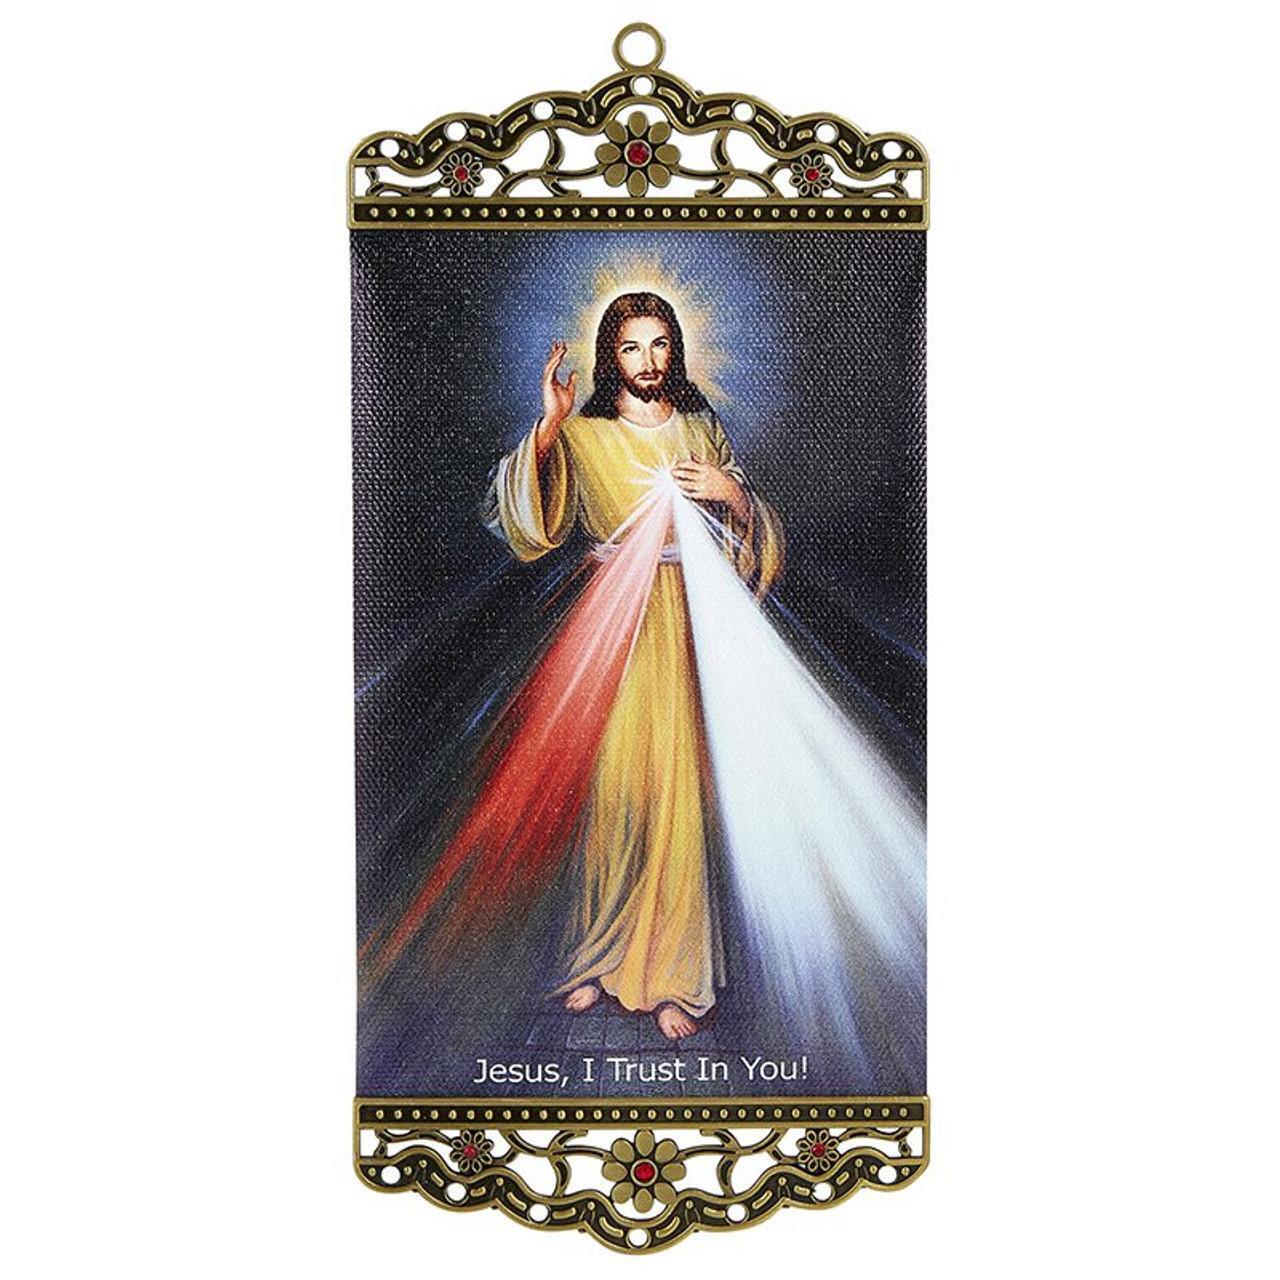 Divine Mercy Wall Hang Wall Hanging Plaque Home or Office Decor